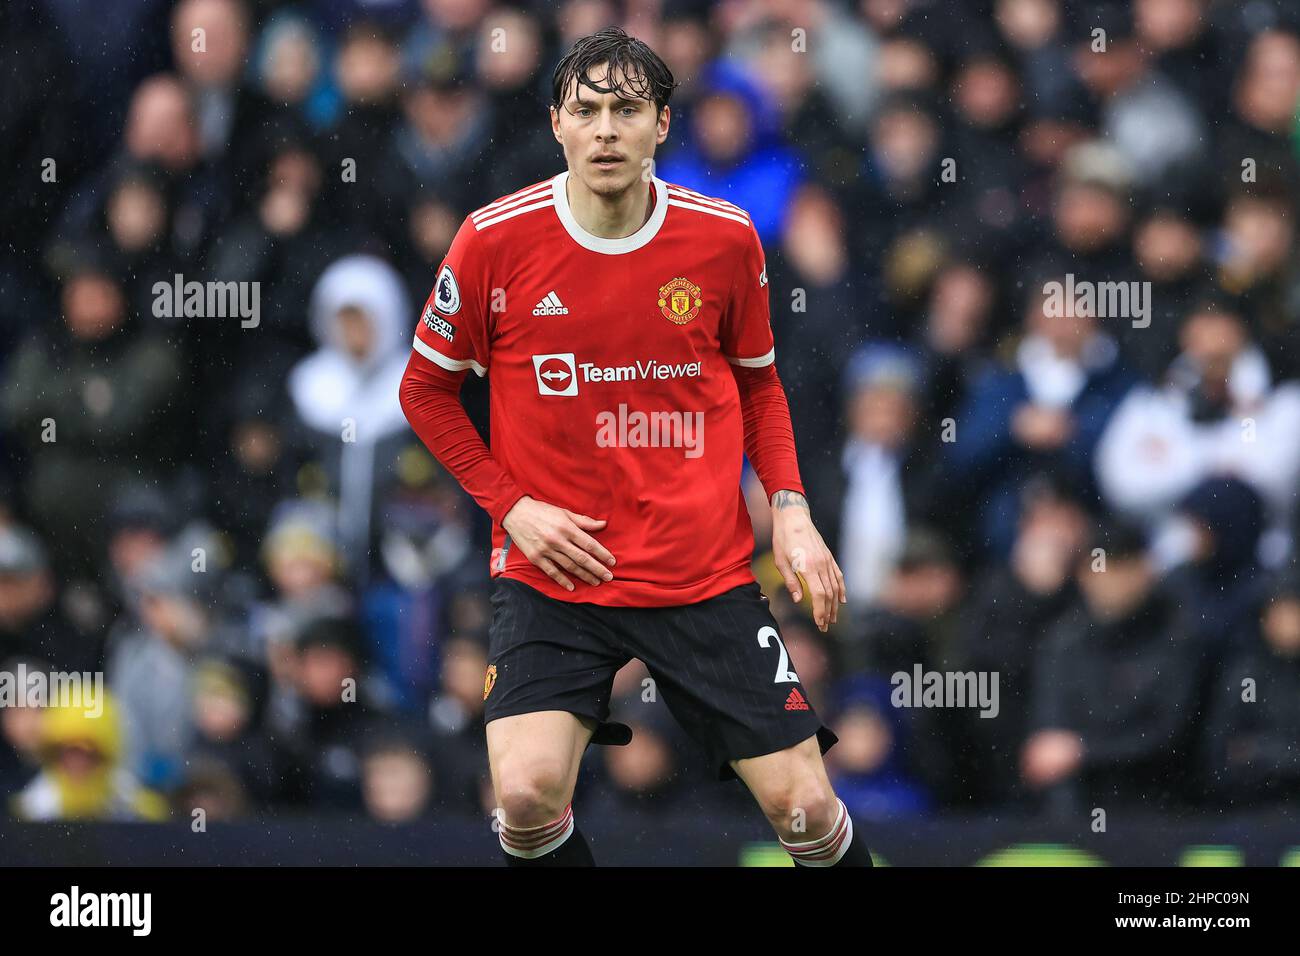 Victor Lindelof #2 of Manchester United during the game Stock Photo